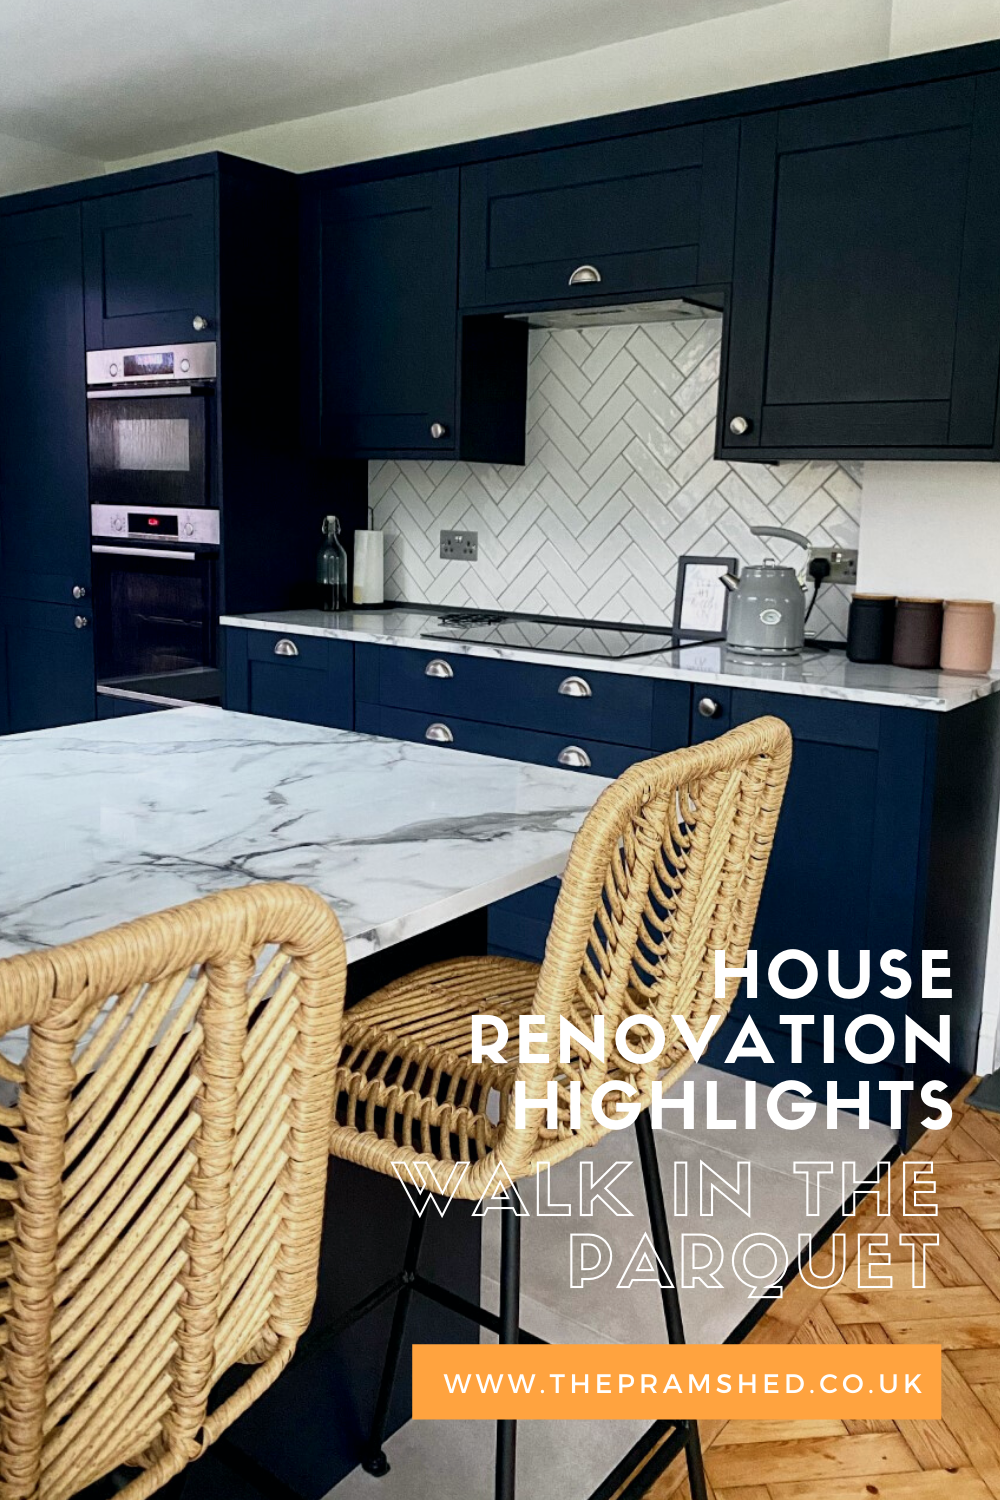 House Renovation Highlights featuring Walk in the Parquet